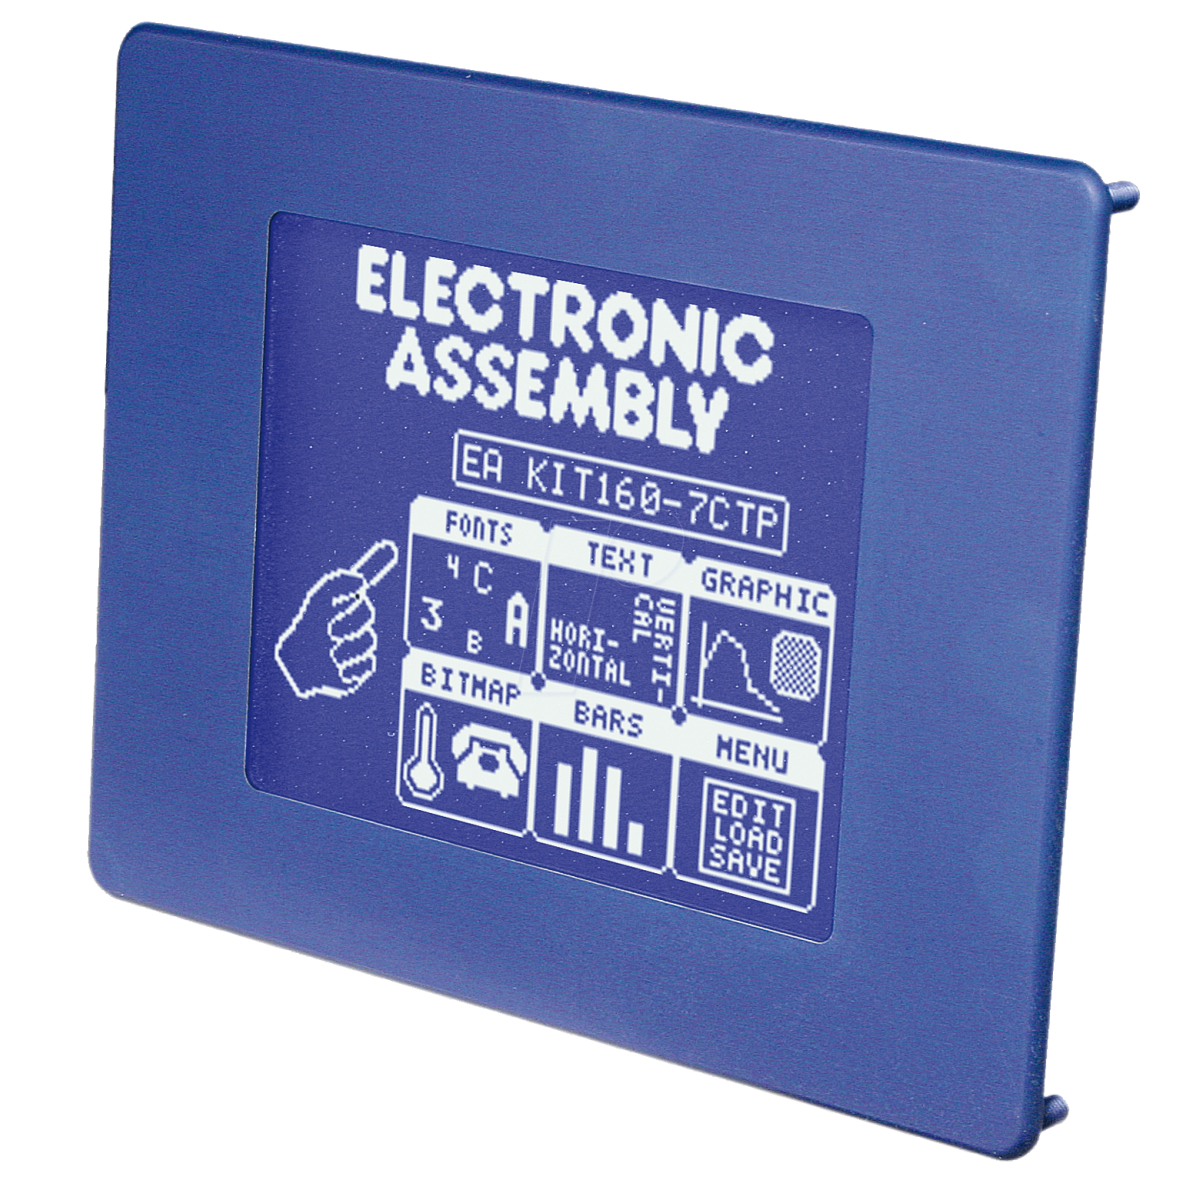 ELECTRONIC ASSEMBLY LCD KIT160-7 - Grafisches Display CFL Beleuchtung - Flat Screen - 7.9 cm